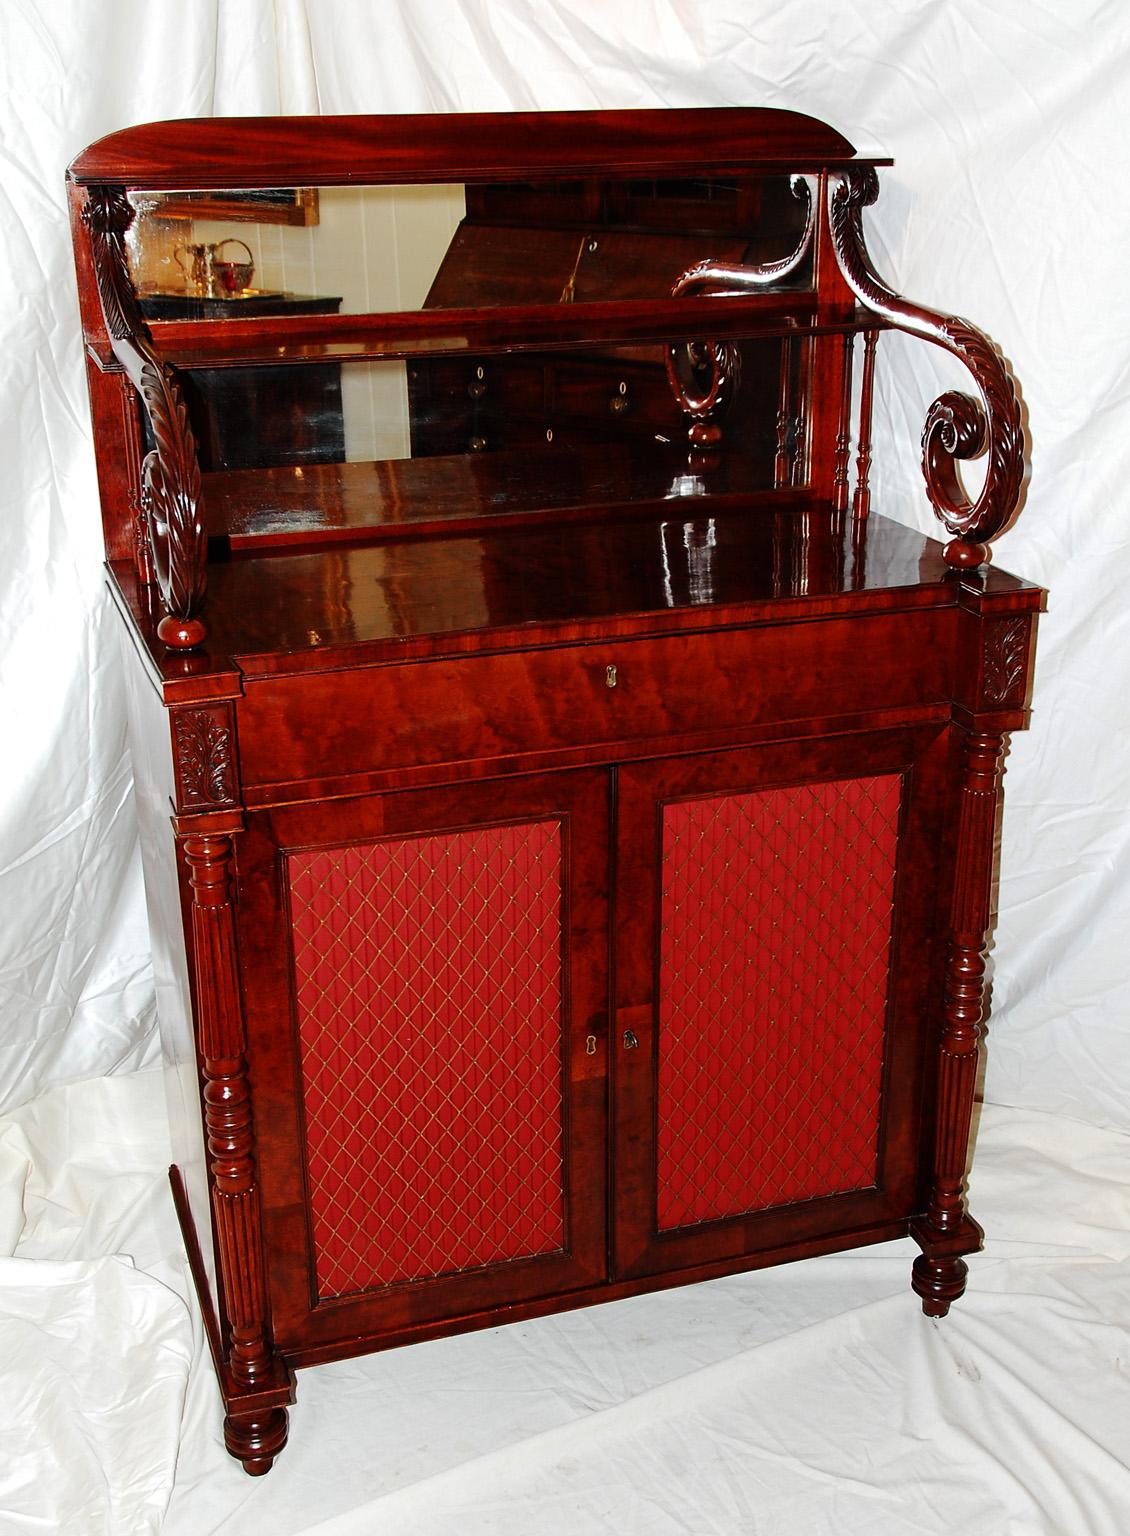 English Regency period flame grained mahogany chiffoniere with mirrored back, and two open shelves flanked by finely carved acanthus leaf scrolls. The two cabinet doors are inset with brass grilles, behind which is pleated fabric (which could easily